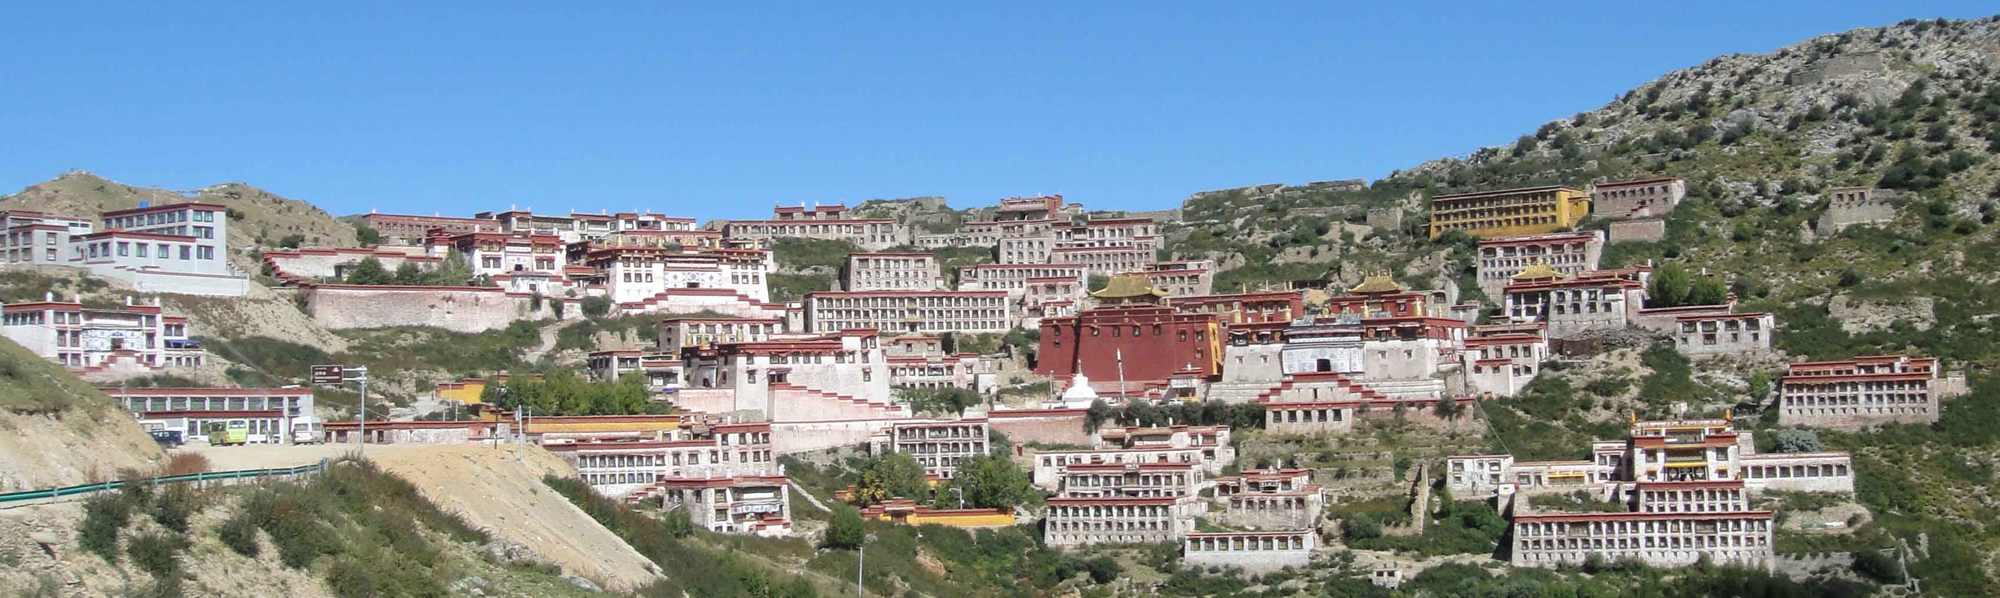 Ganden Monastery the seat of His Holiness the Ganden Tripa